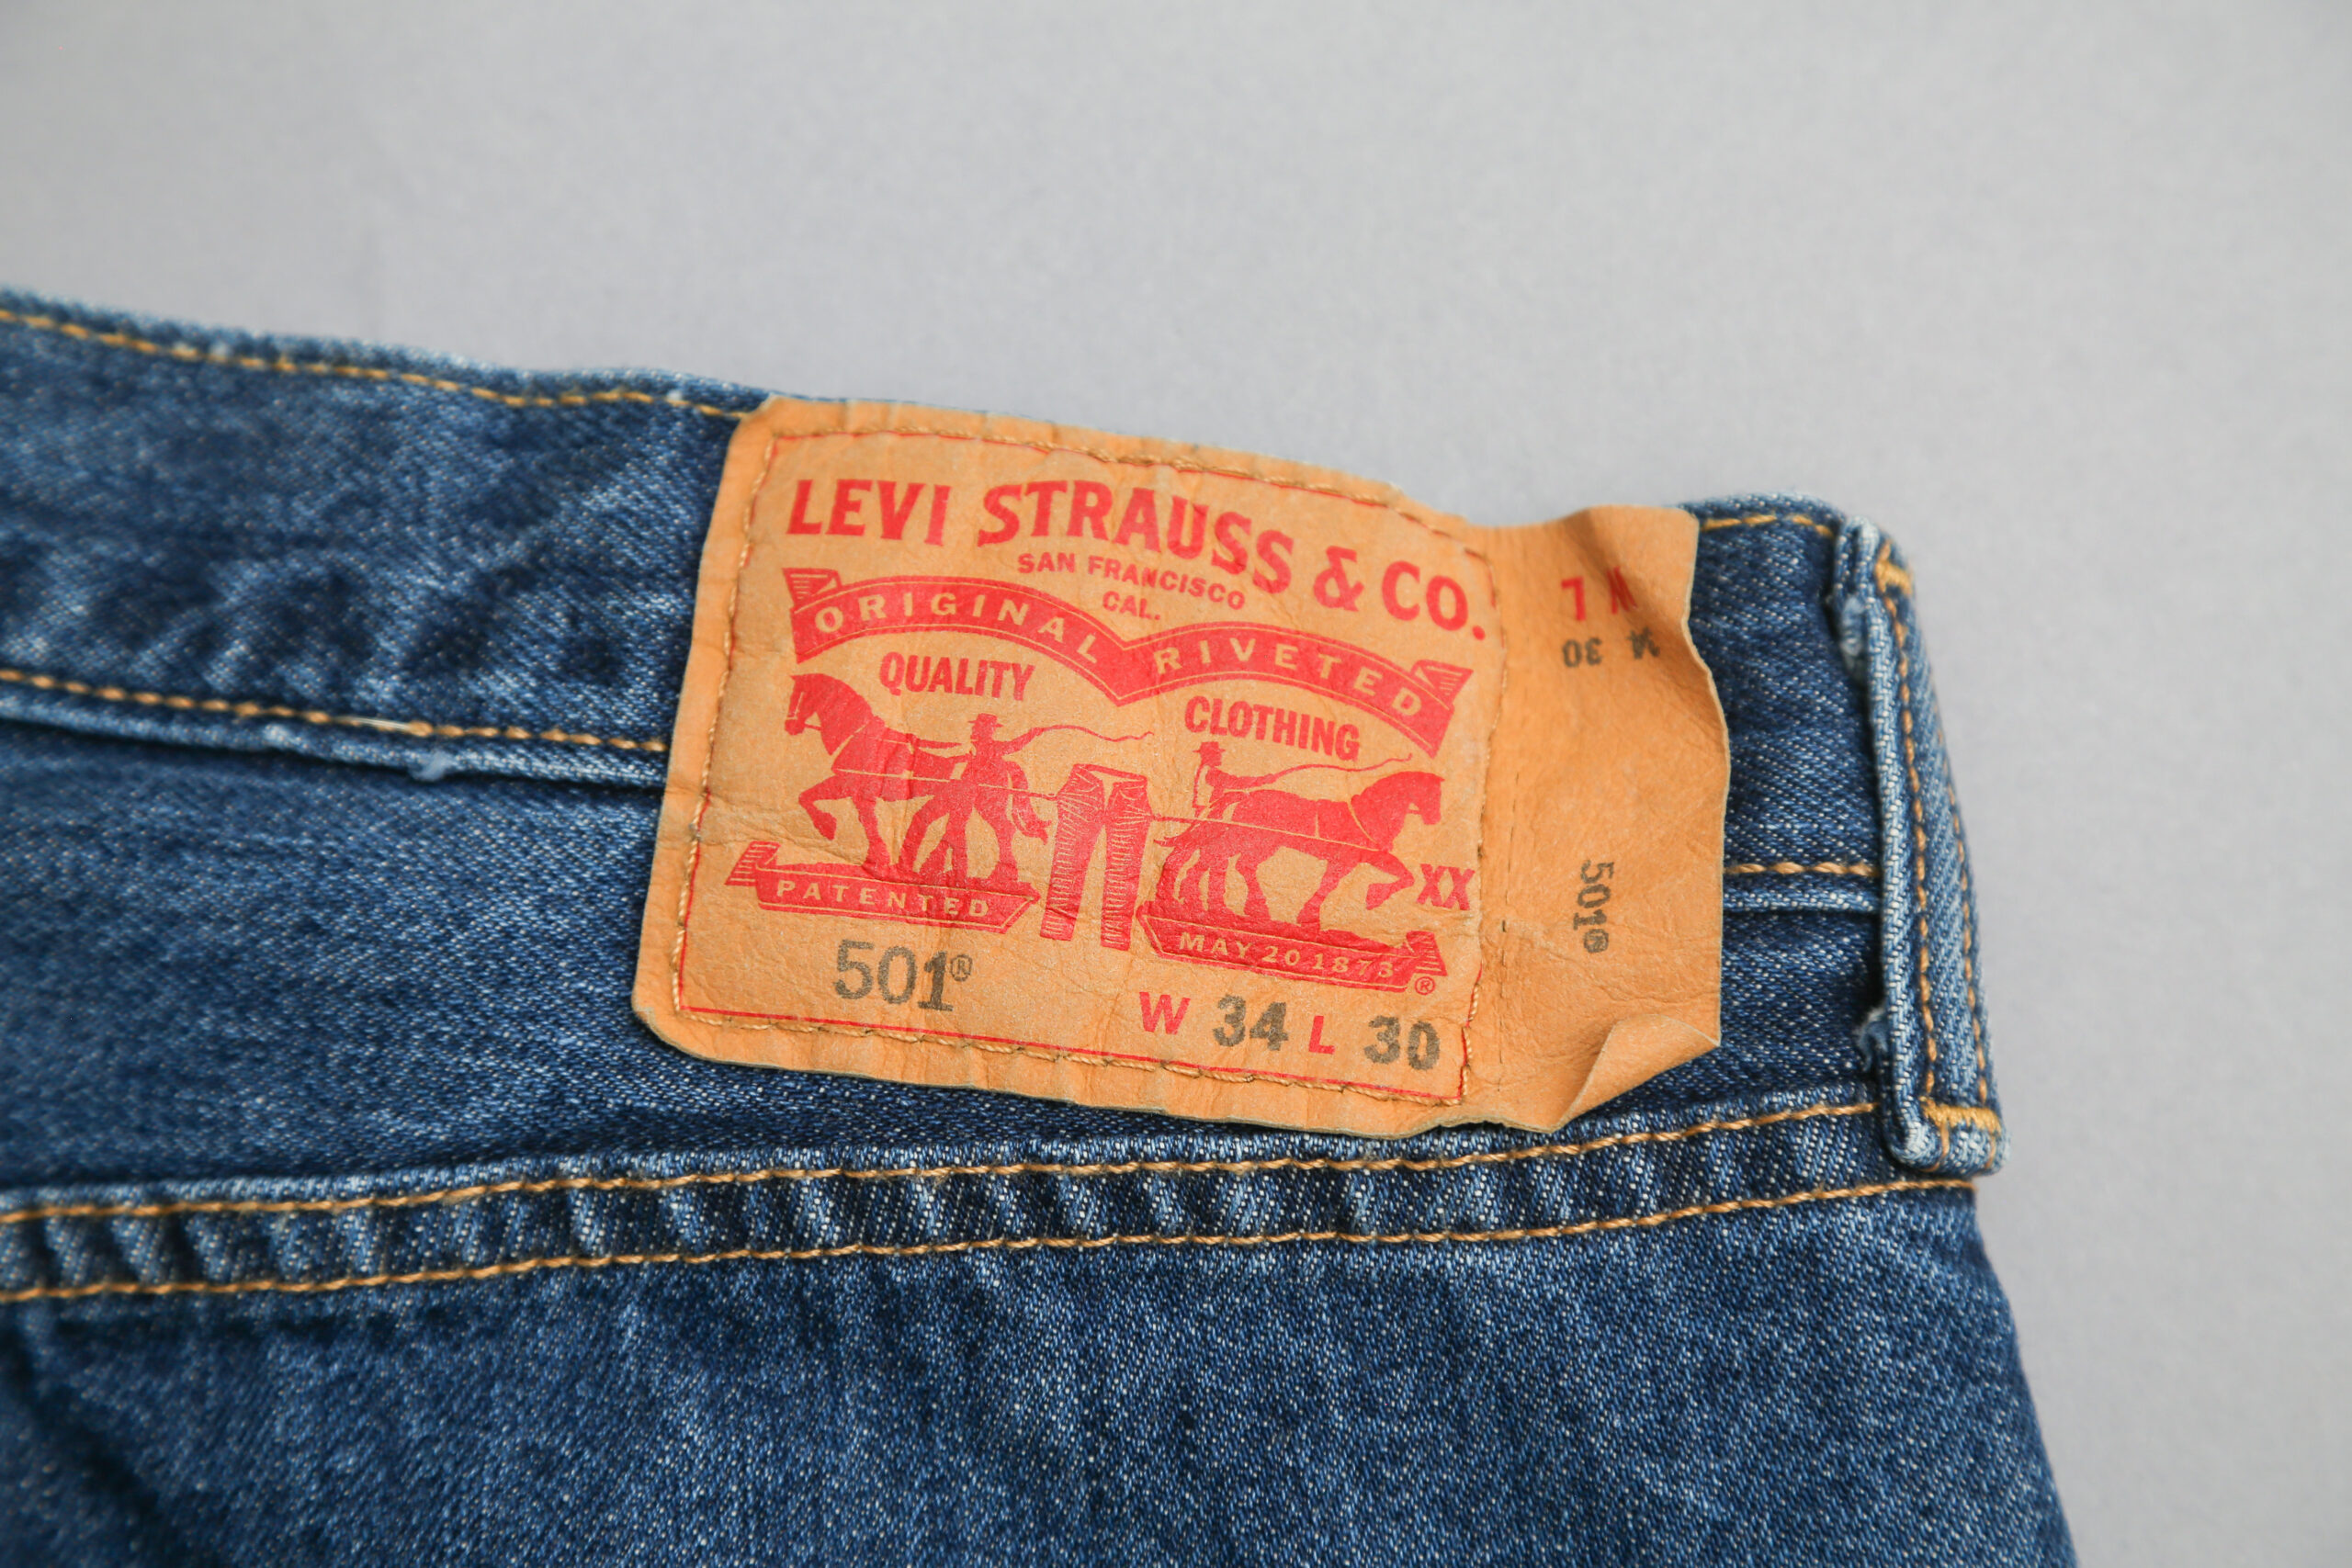 Save on classic Levi's jeans and denim jackets at Amazon during this ...